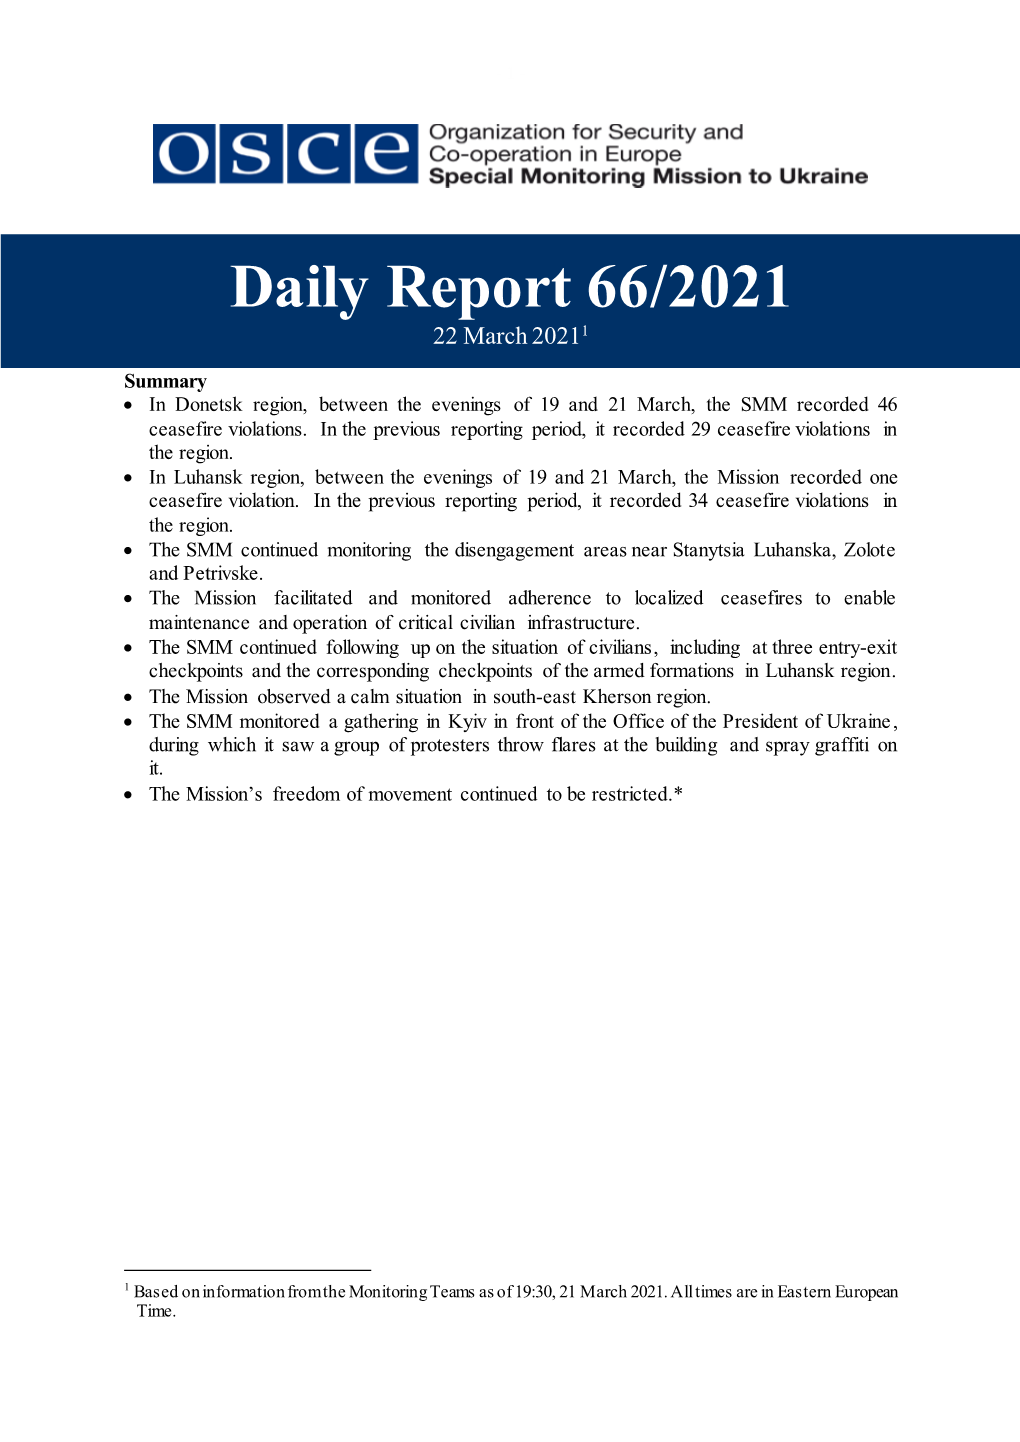 Daily Report 66/2021 22 March 20211